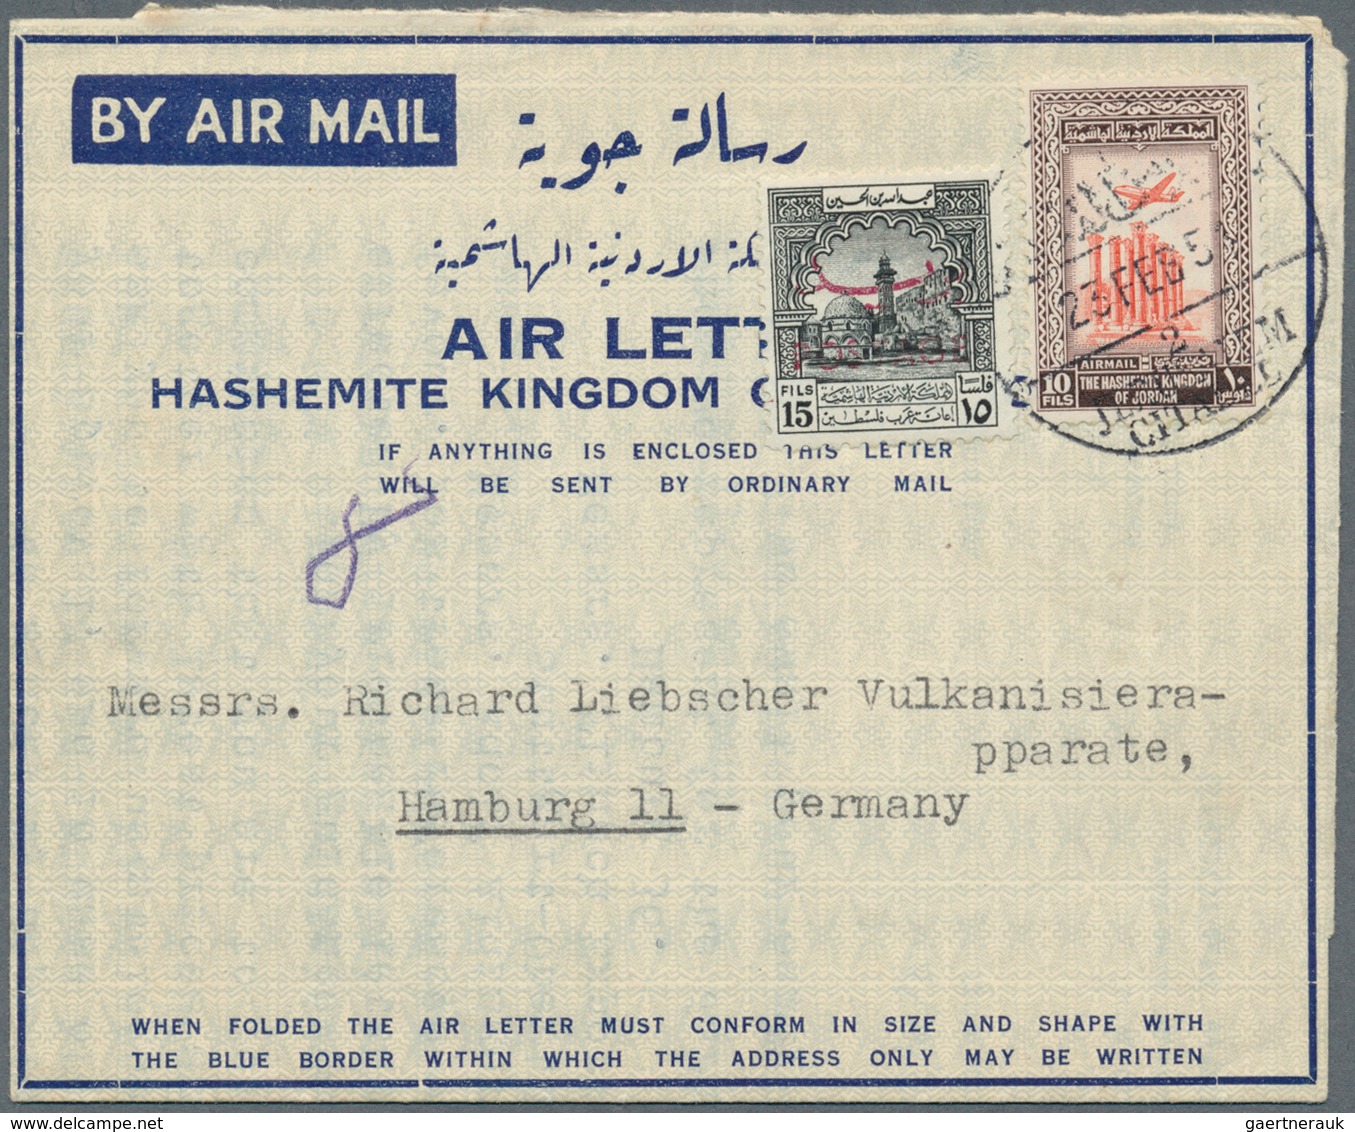 Jordanien: 1948 - 1979, 37 Covers, Nice Collection Of Covers And Some Postal Stationery, Good Franki - Jordania